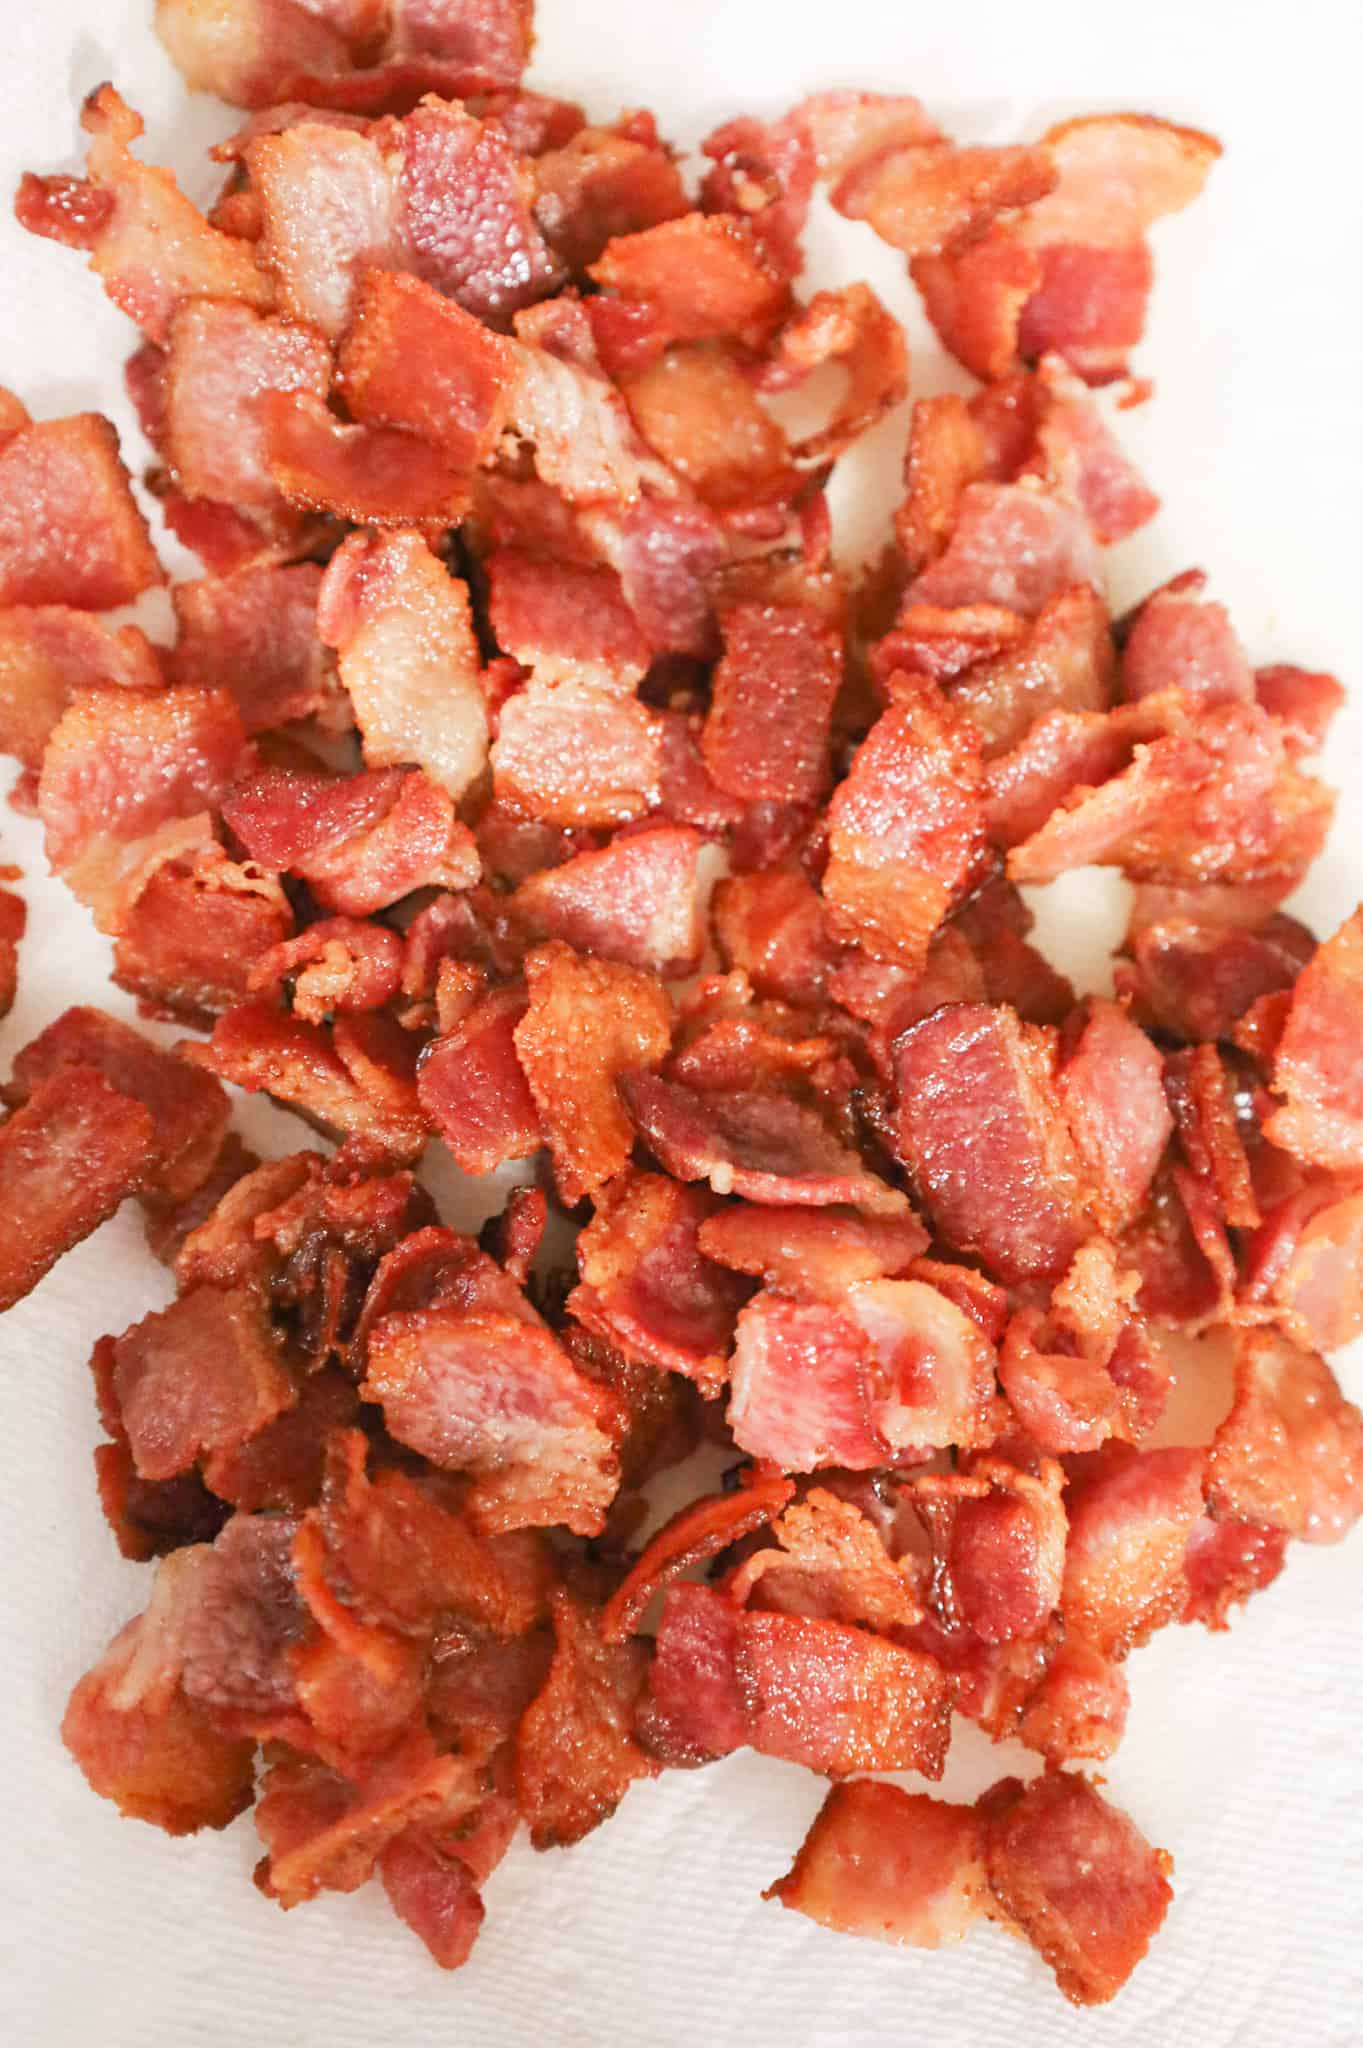 cook bacon pieces on a paper towel lined plate